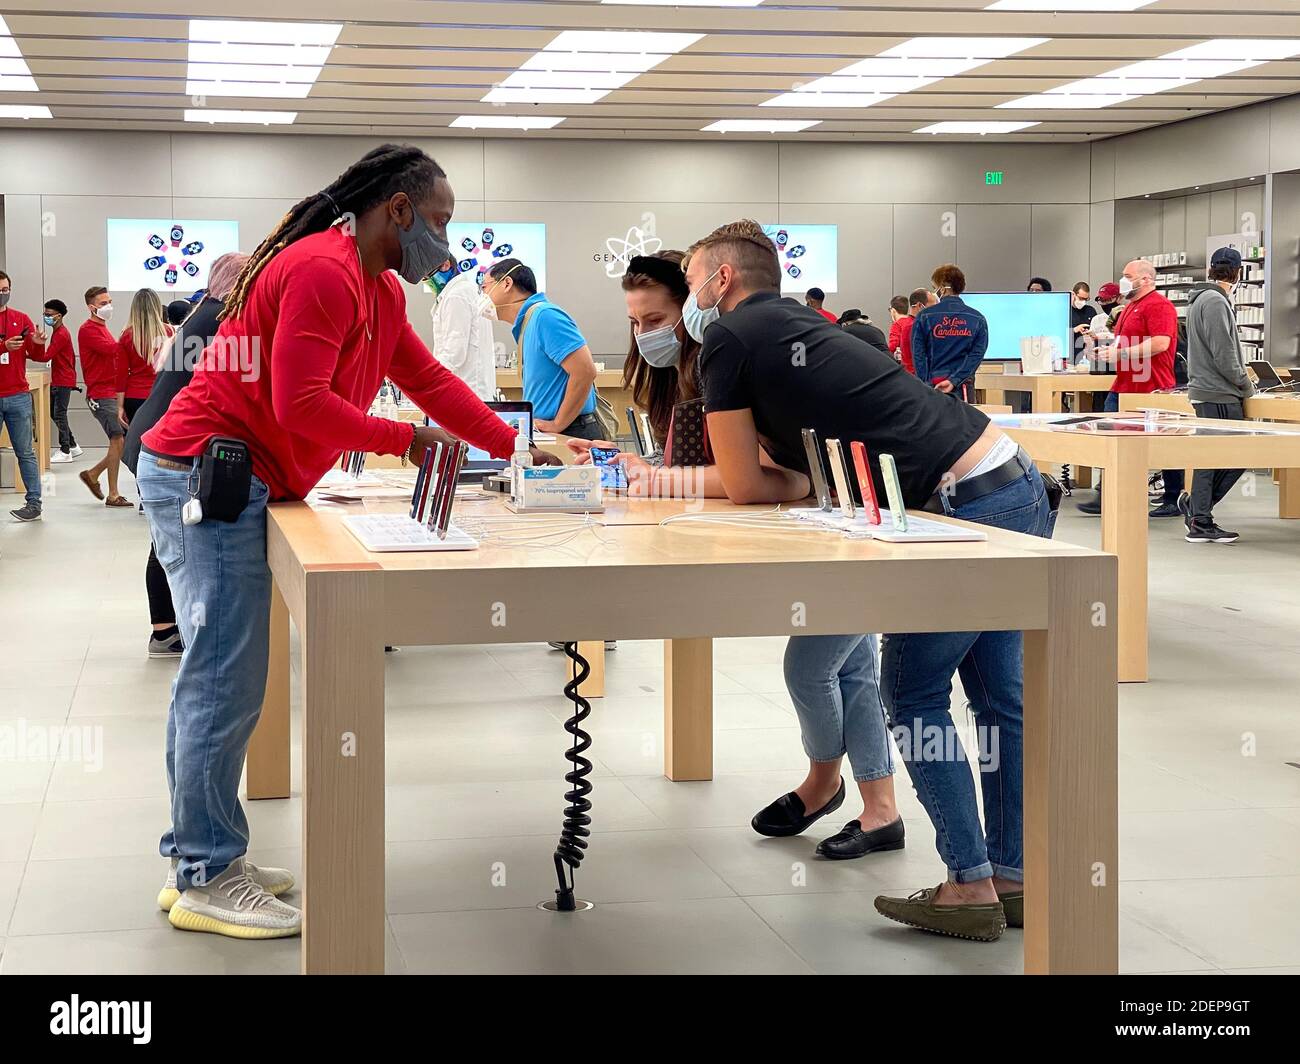 Orlando, FL USA - November 20, 2020: A salesperson and customers at an Apple  store looking at the latest Apple iPhone 12 models for sale Stock Photo -  Alamy